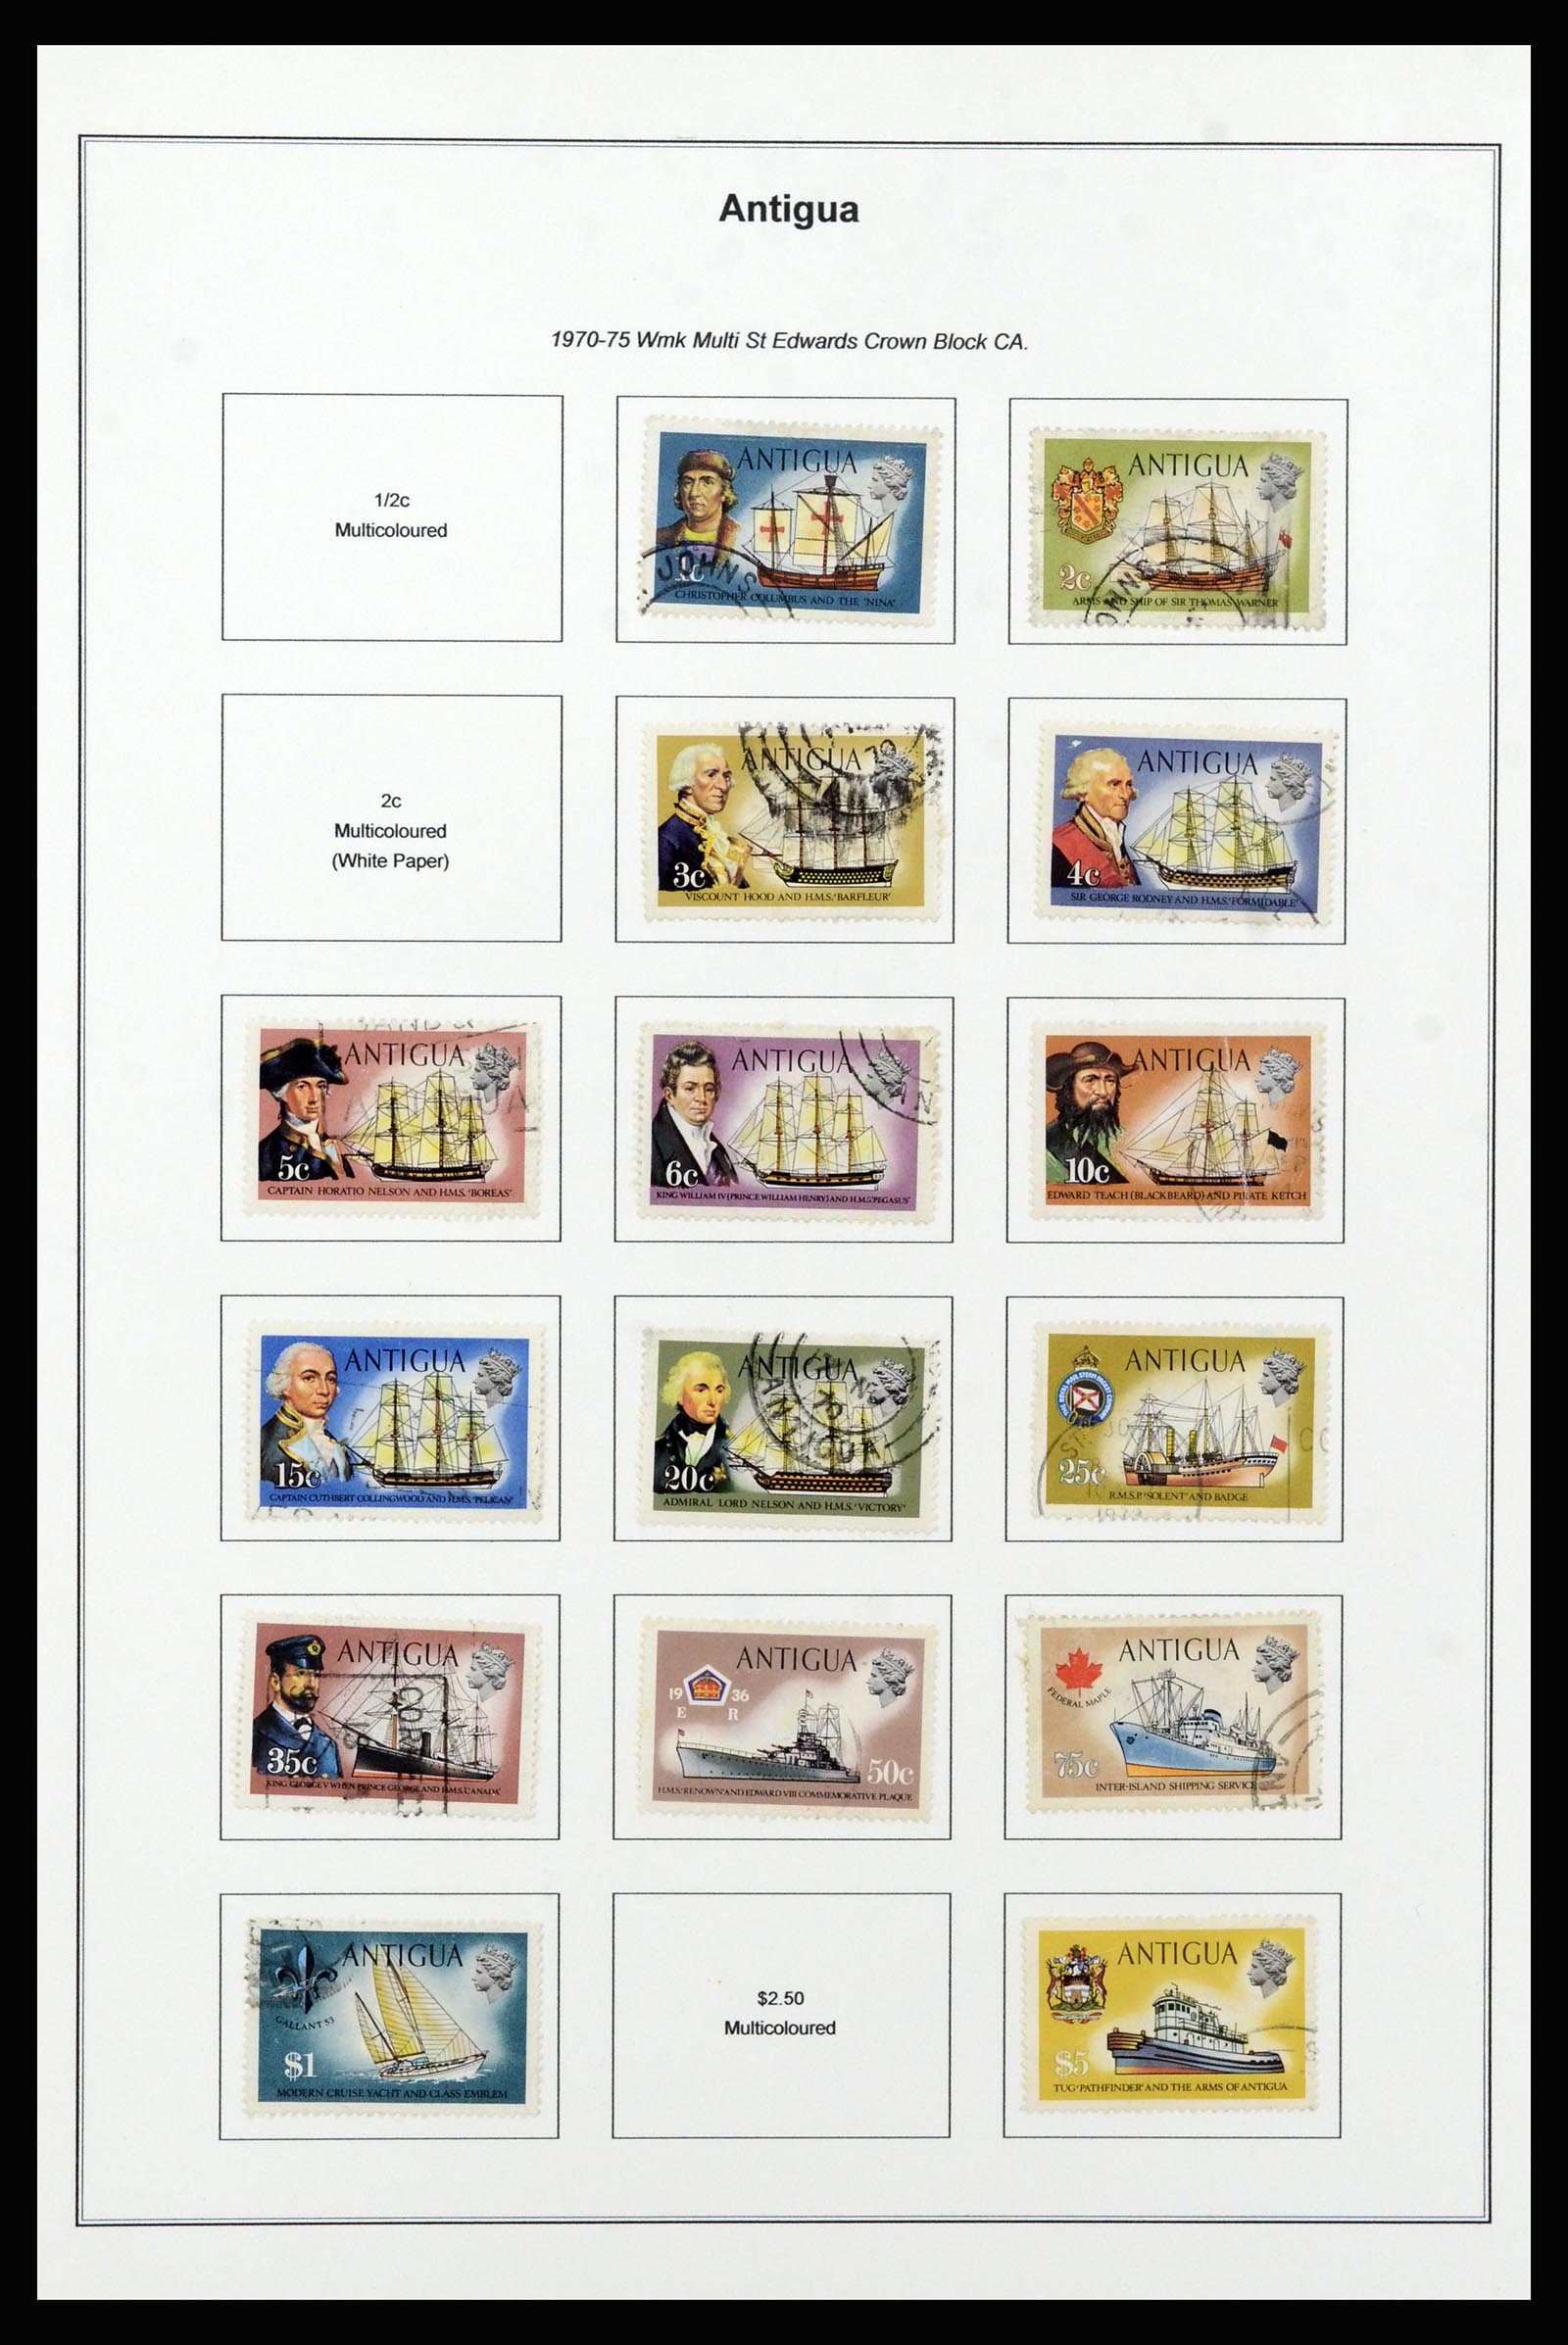 37202 024 - Stamp collection 37202 Antigua 1903-1970.